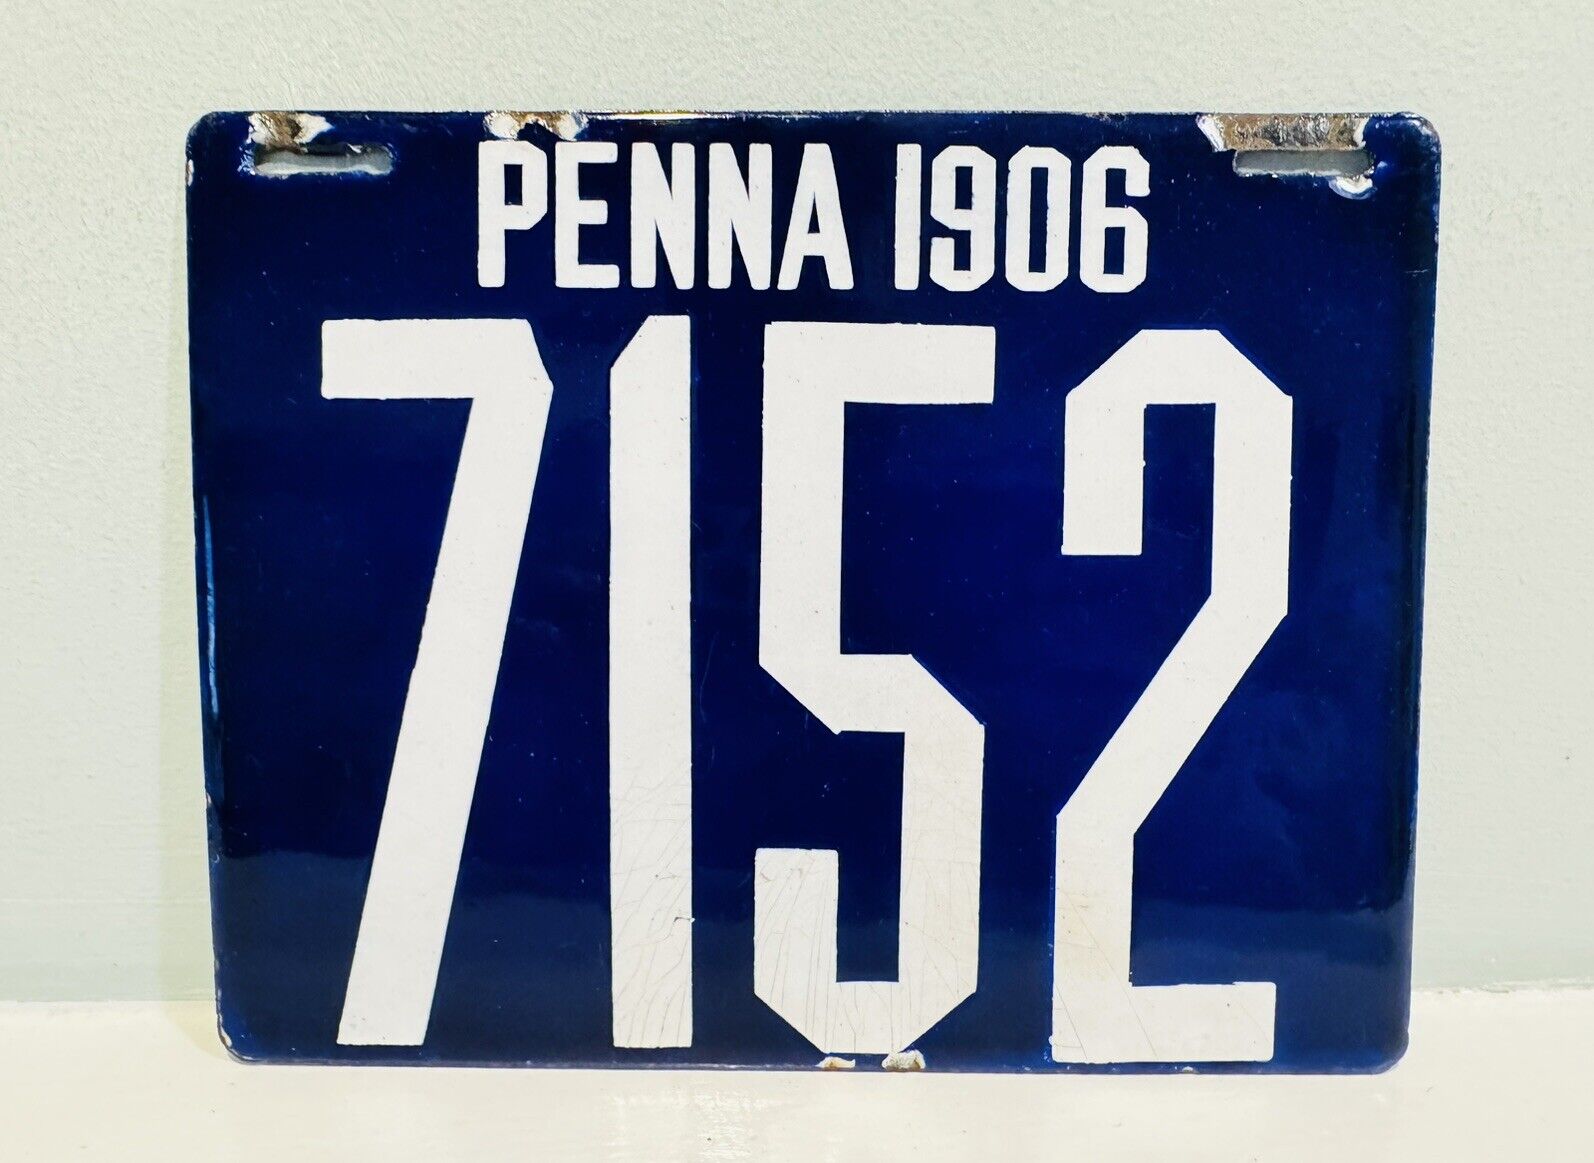 1906 Pennsylvania Porcelain License Plate 7152 ALPCA First Issue Great GLOSS